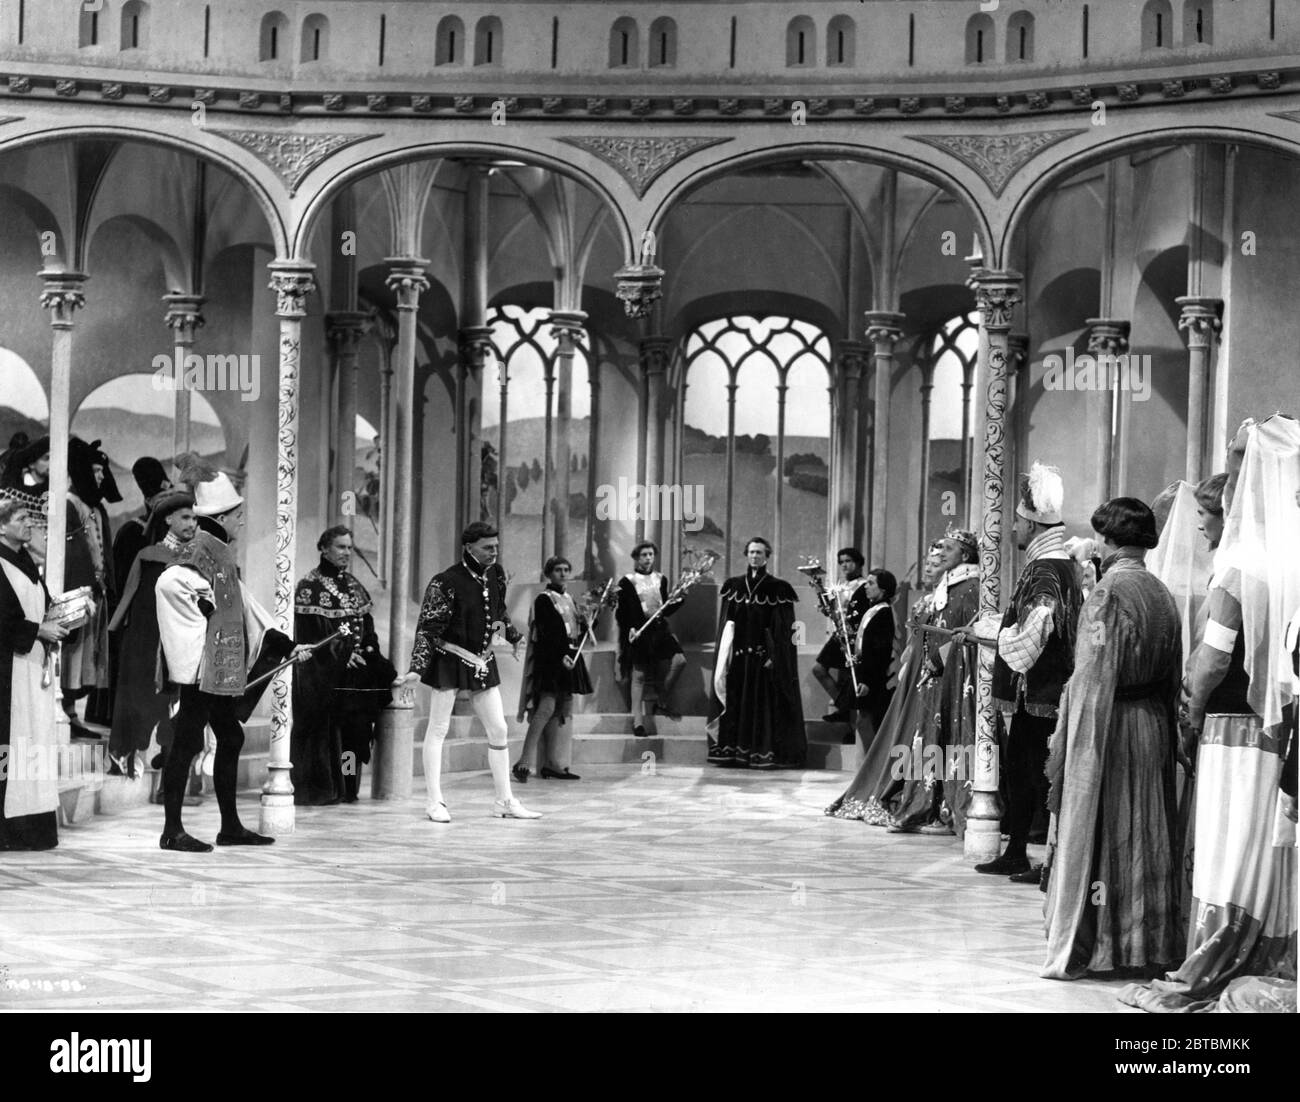 VERNON GREEVES NICHOLAS HANNAN LAURENCE OLIVIER VALENTINE DYALL JANET BURNELL HARCOURT WILLIAMS and RALPH TRUMAN in HENRY V 1944 director LAURENCE OLIVIER play William Shakespeare music William Walton Two Cities Films / Eagle - Lion Distributors Ltd Stock Photo